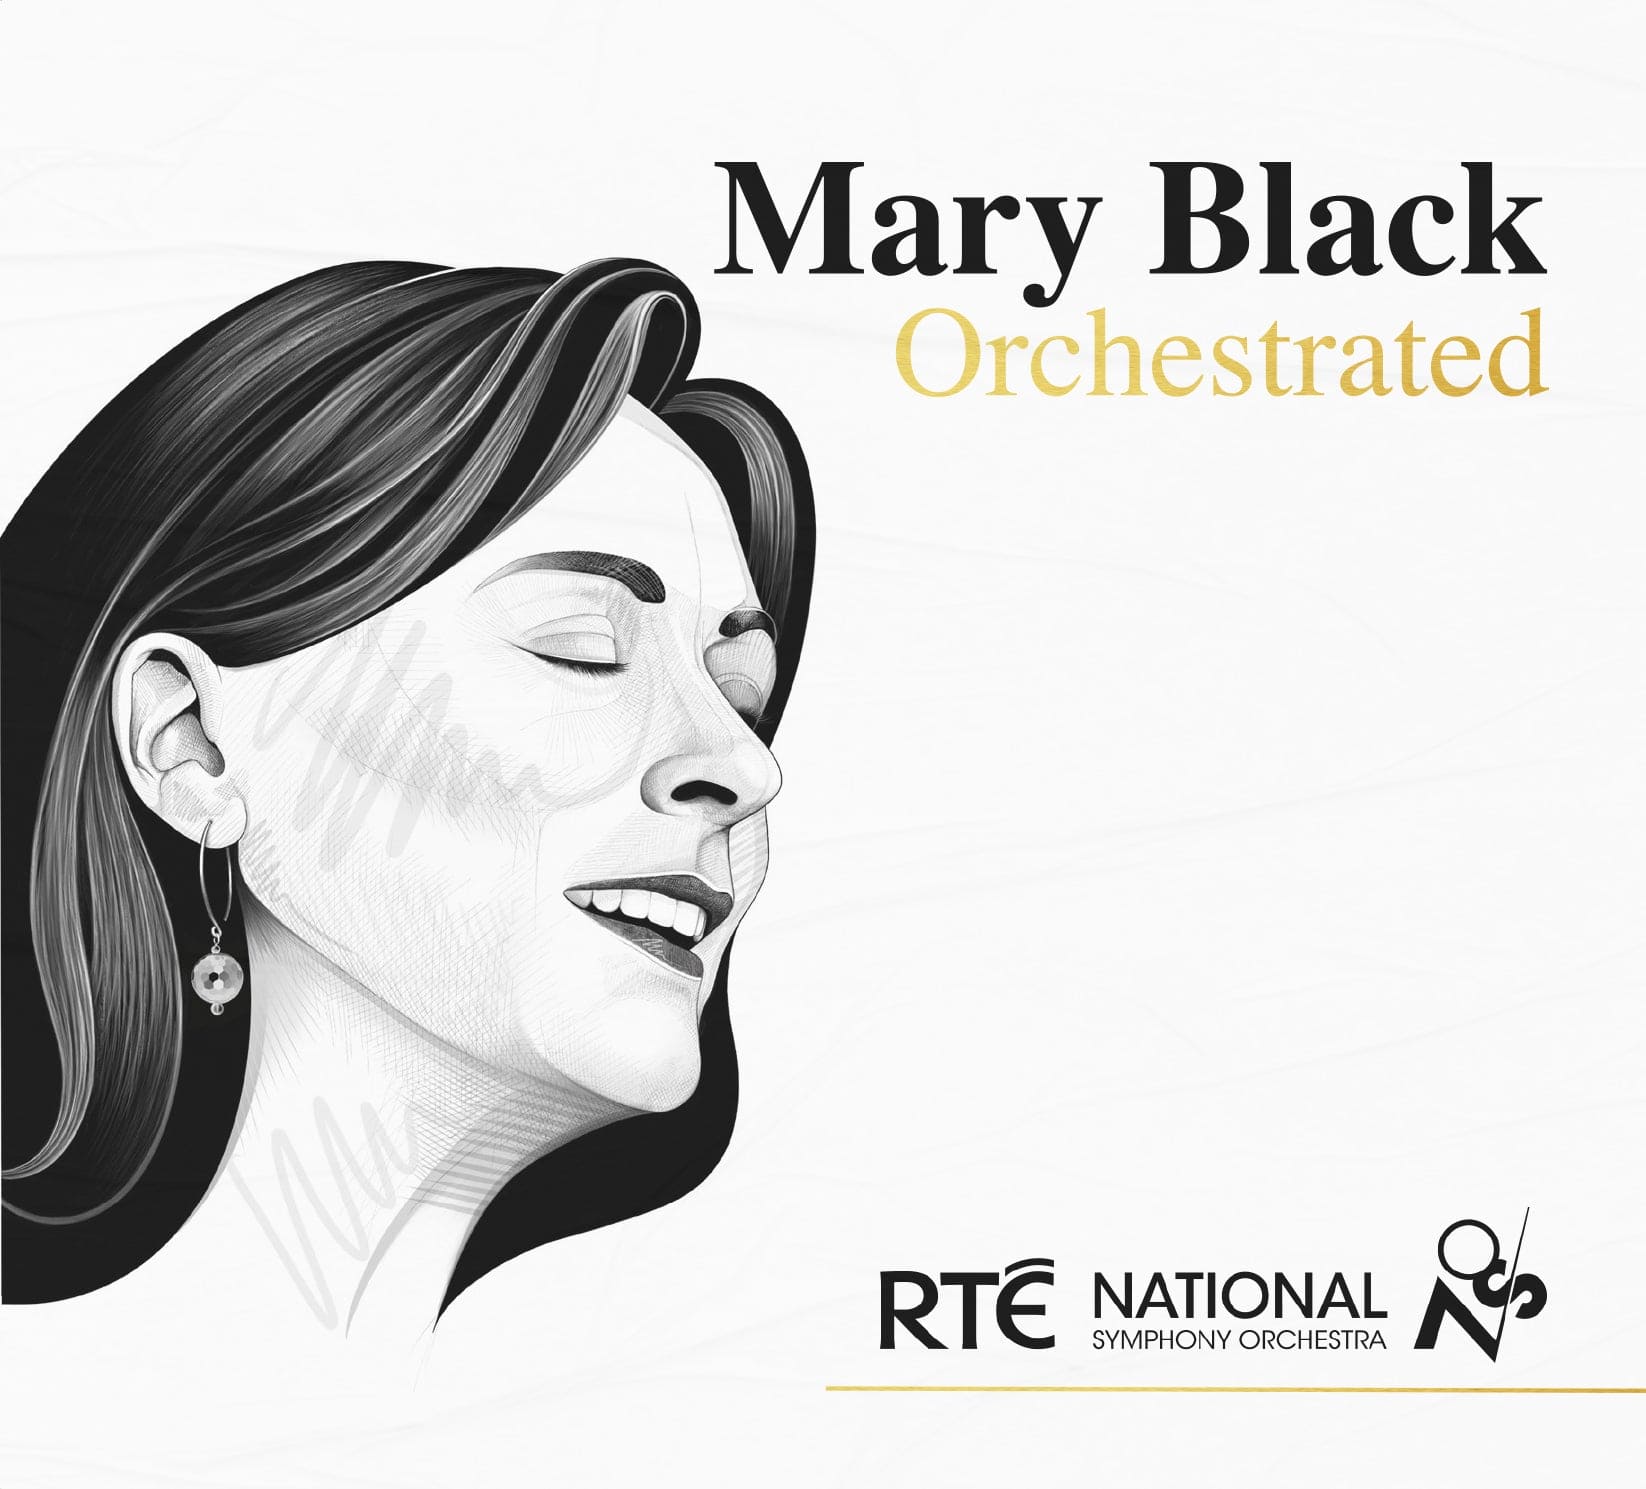 Mary Black Orchestrated - Mary Black featuring The National Symphony Orchestra [CD]